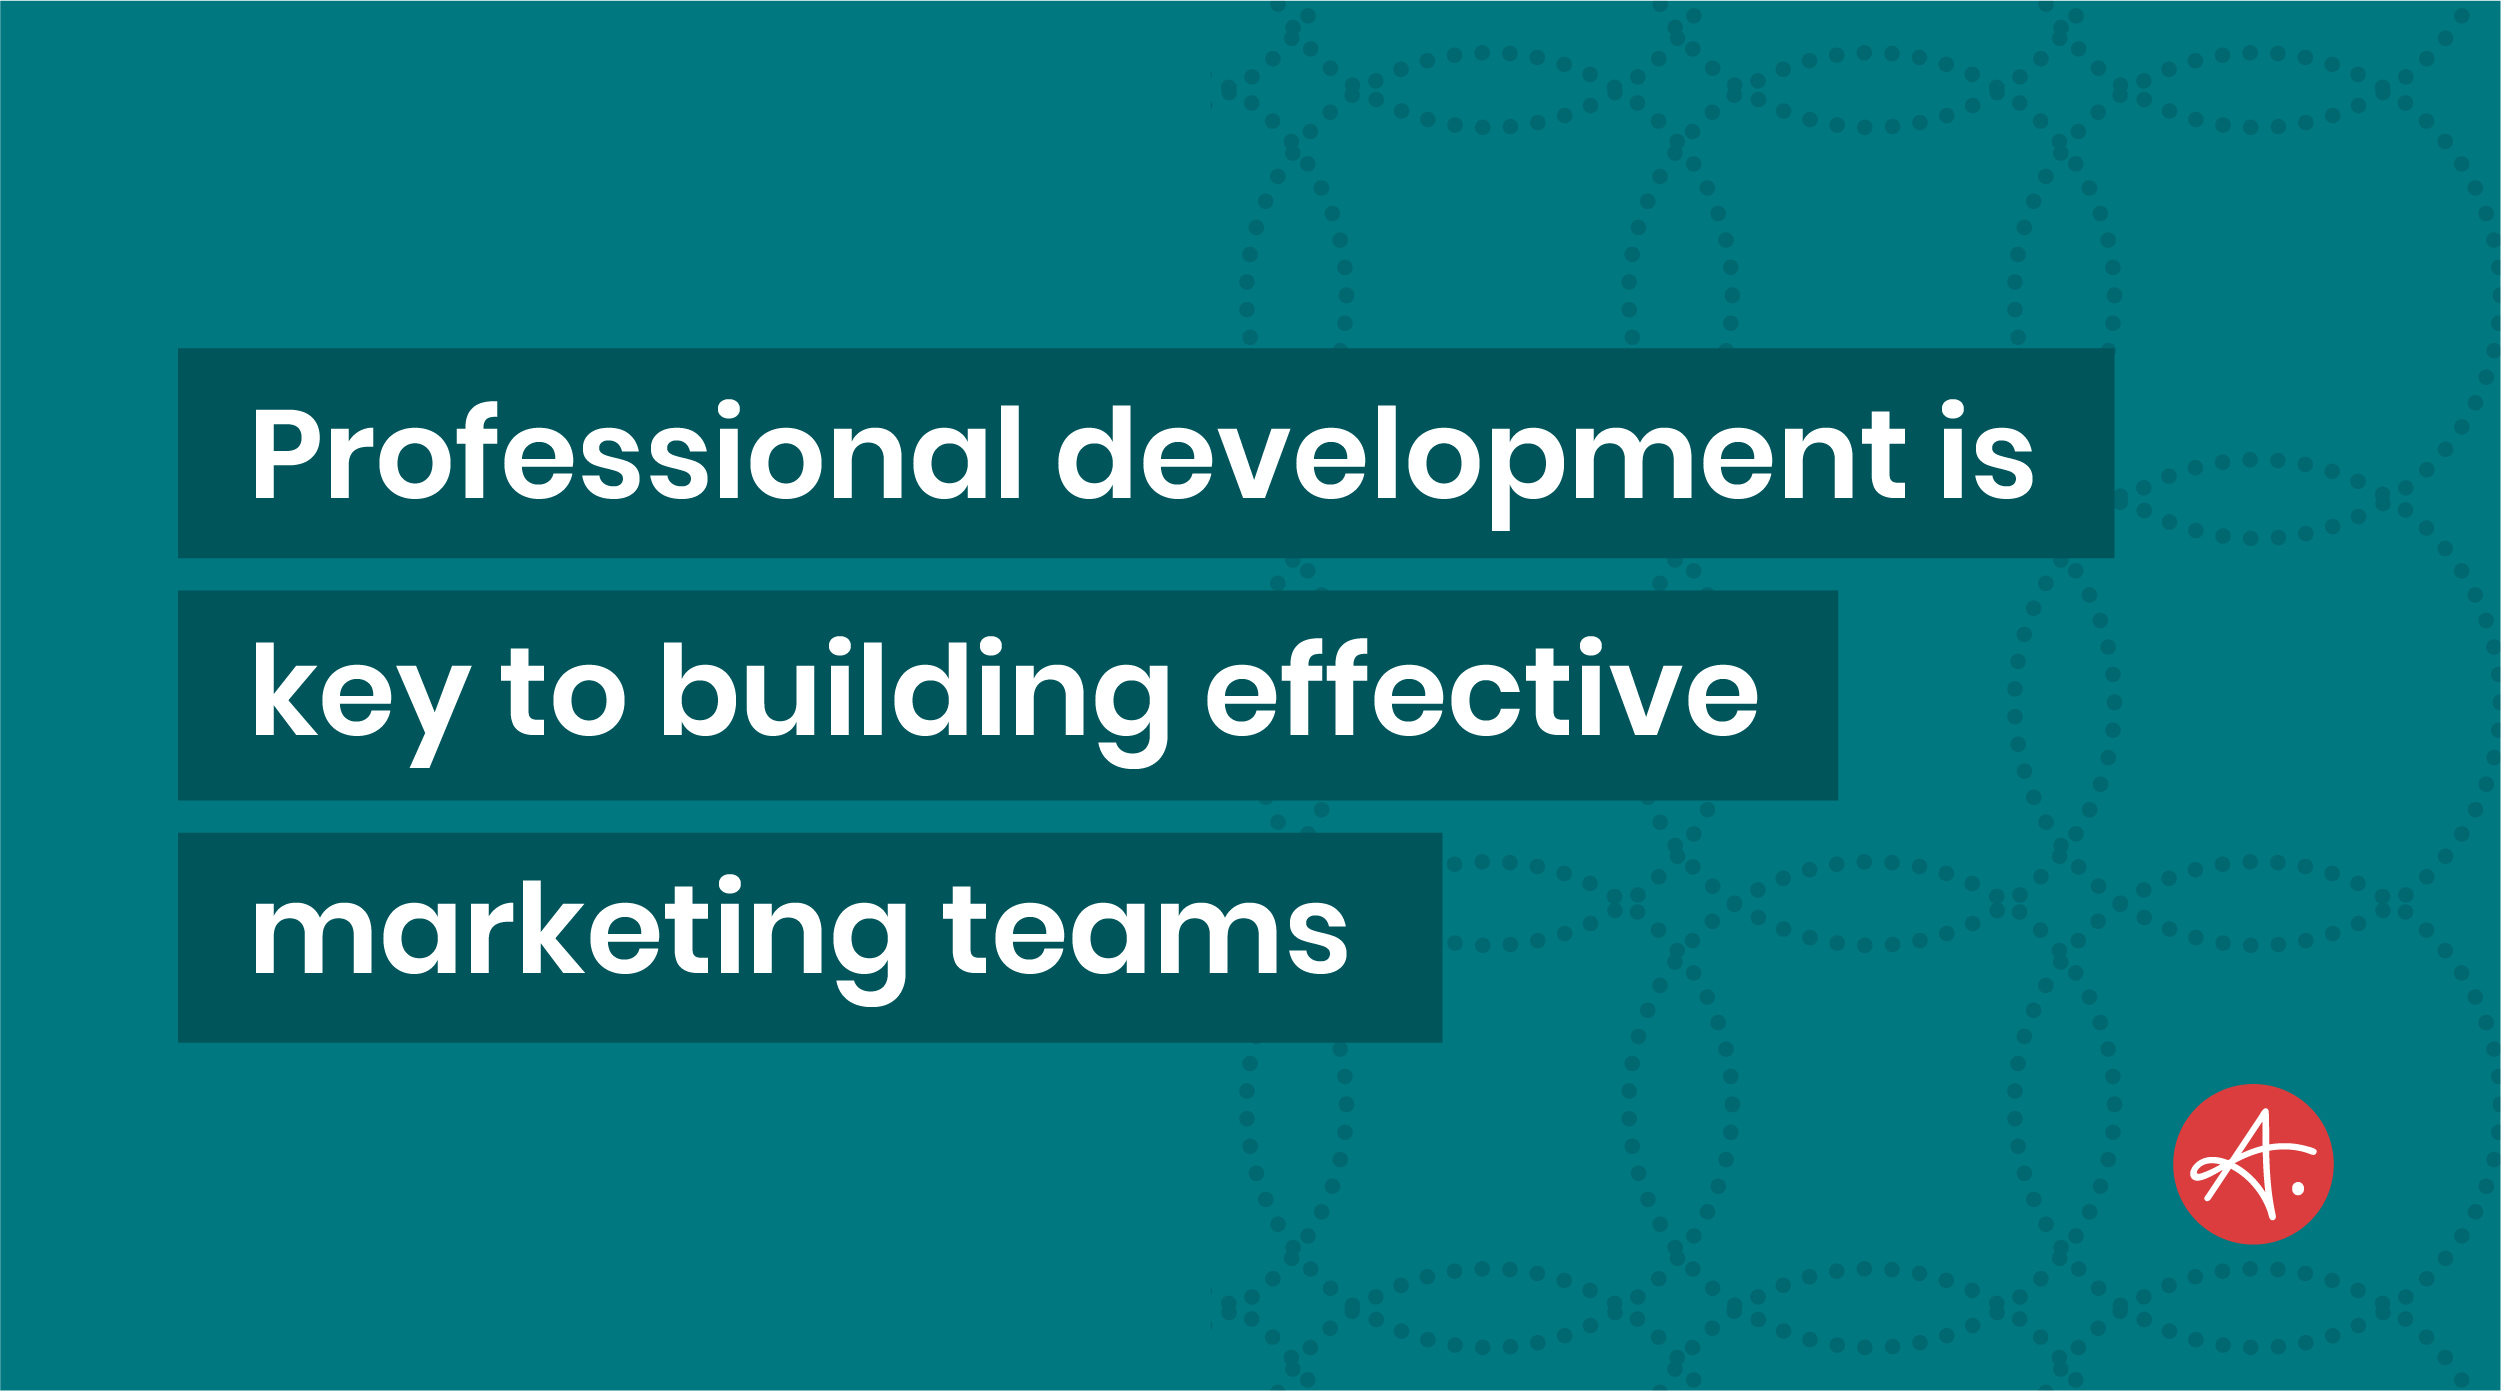 Professional development is key to building effective marketing teams